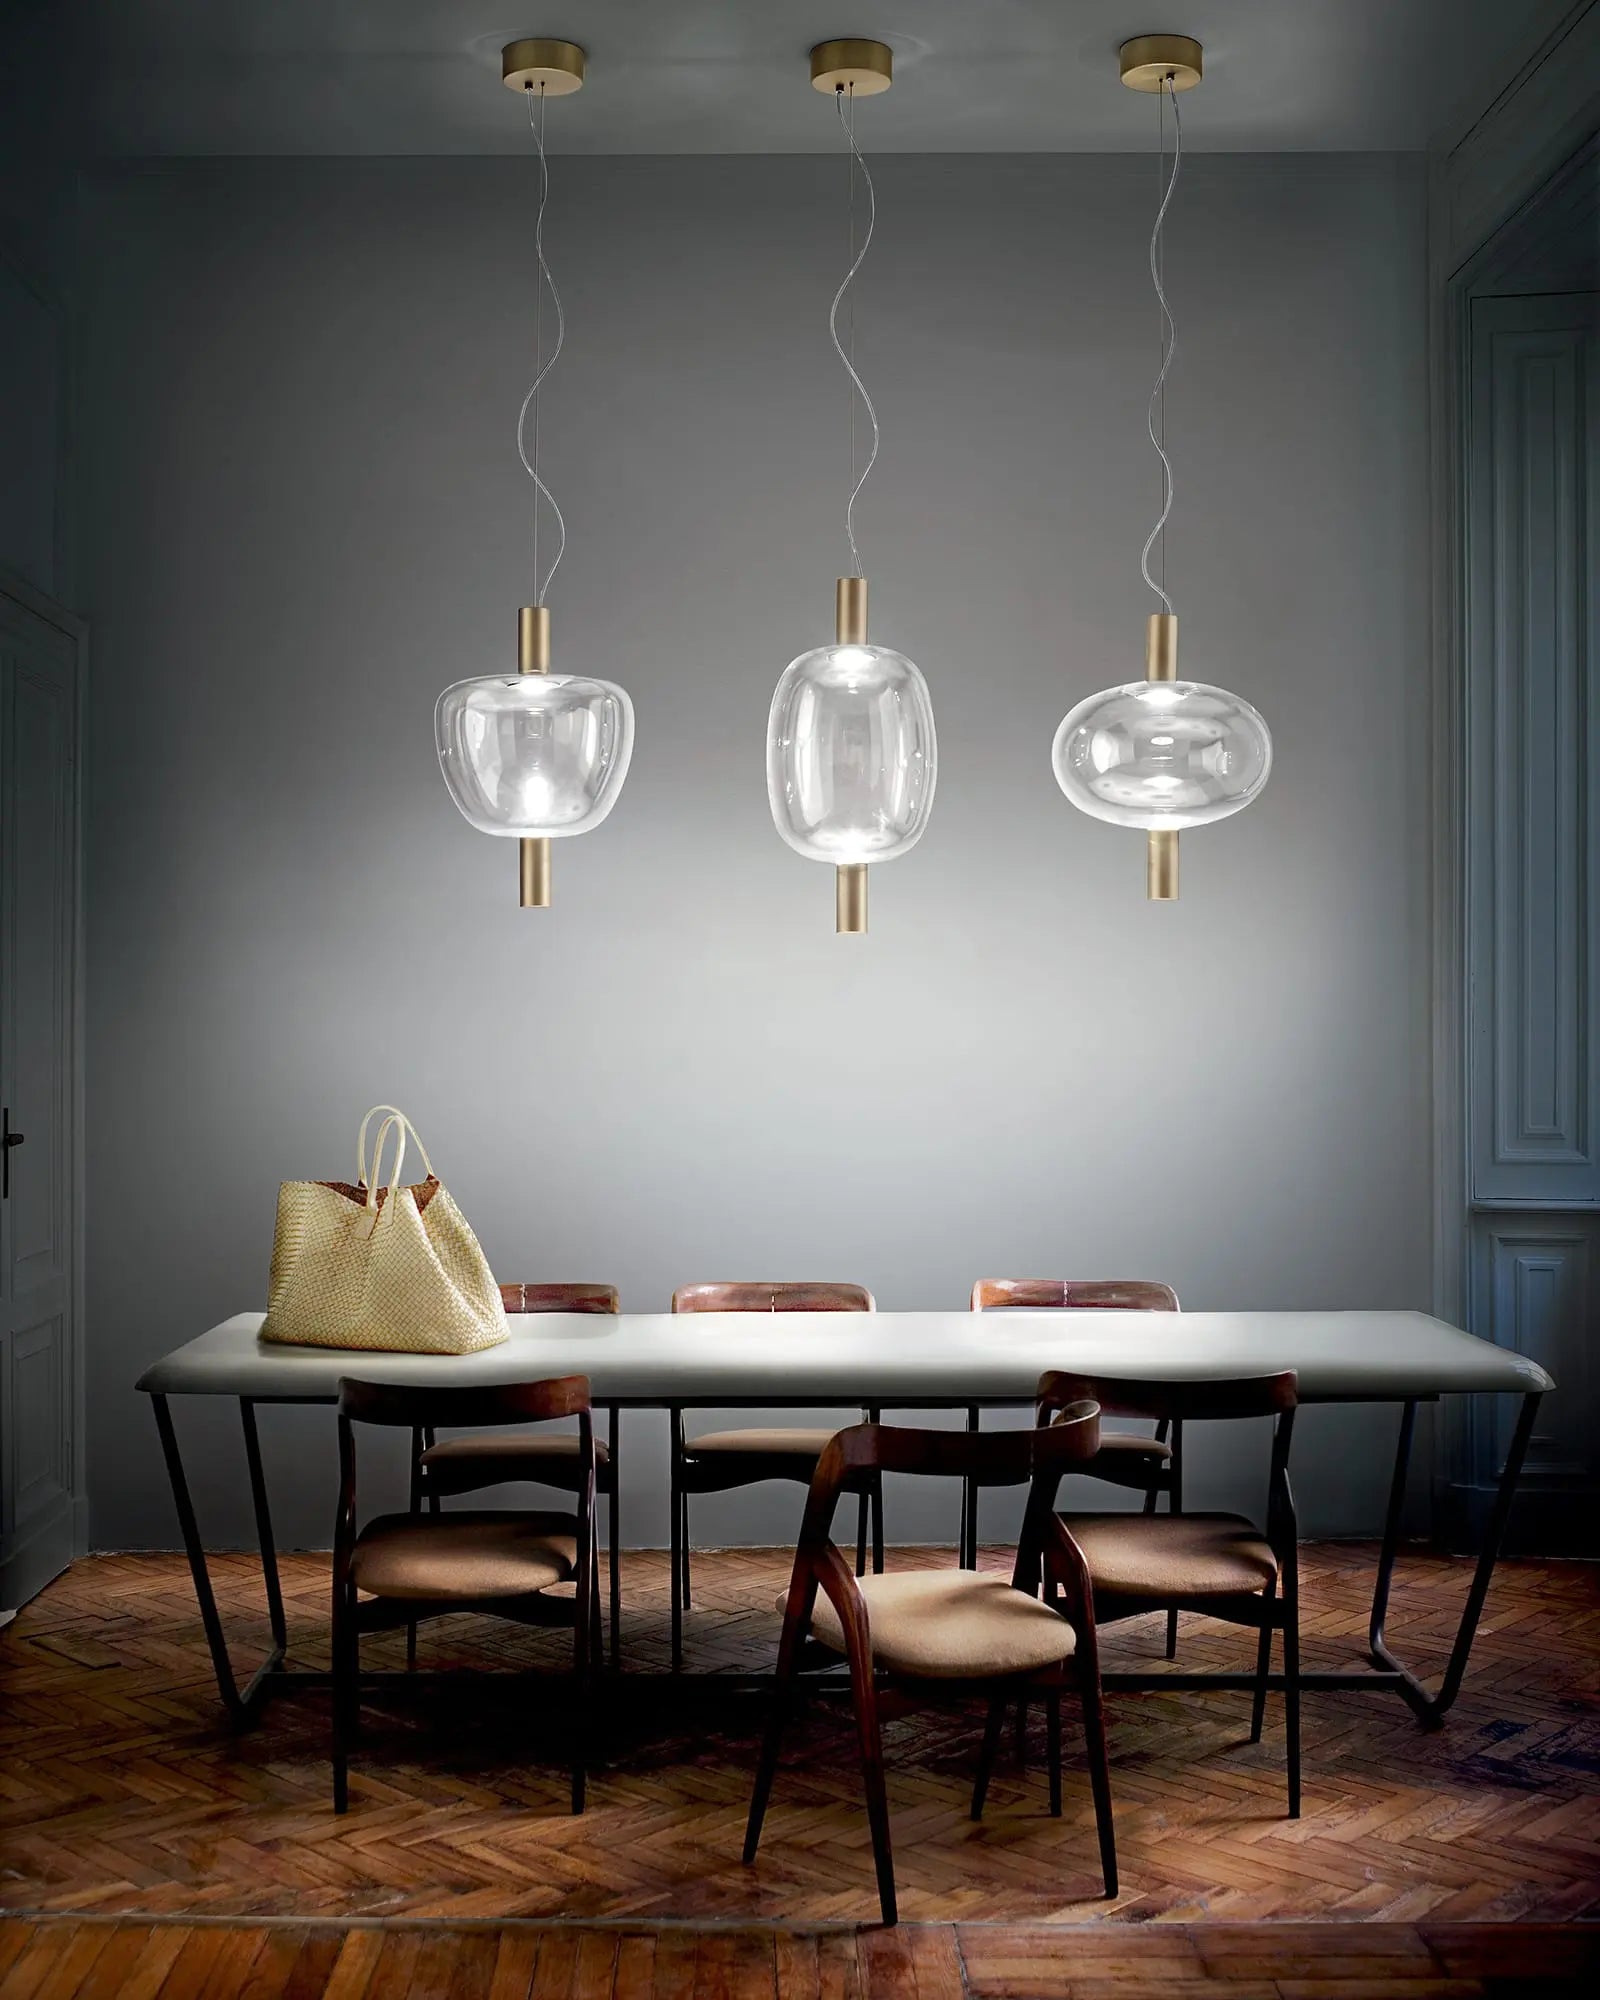 Riflesso modern blown glass and metal pendant light cluster above dining table